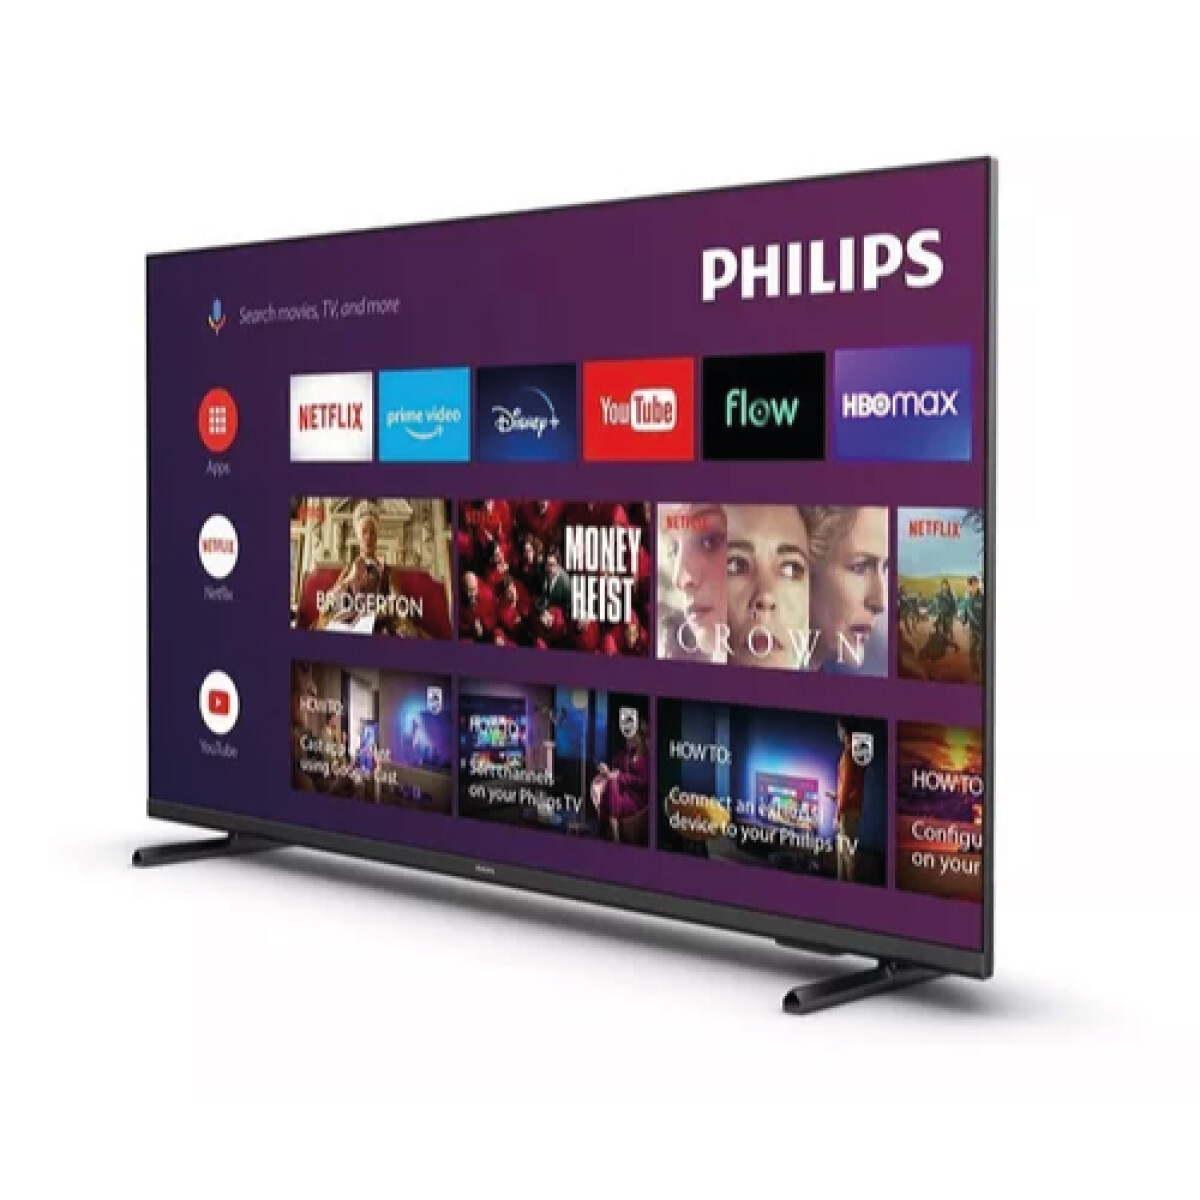 Smart Tv 32' Philips Con Android 32phd6947/55 